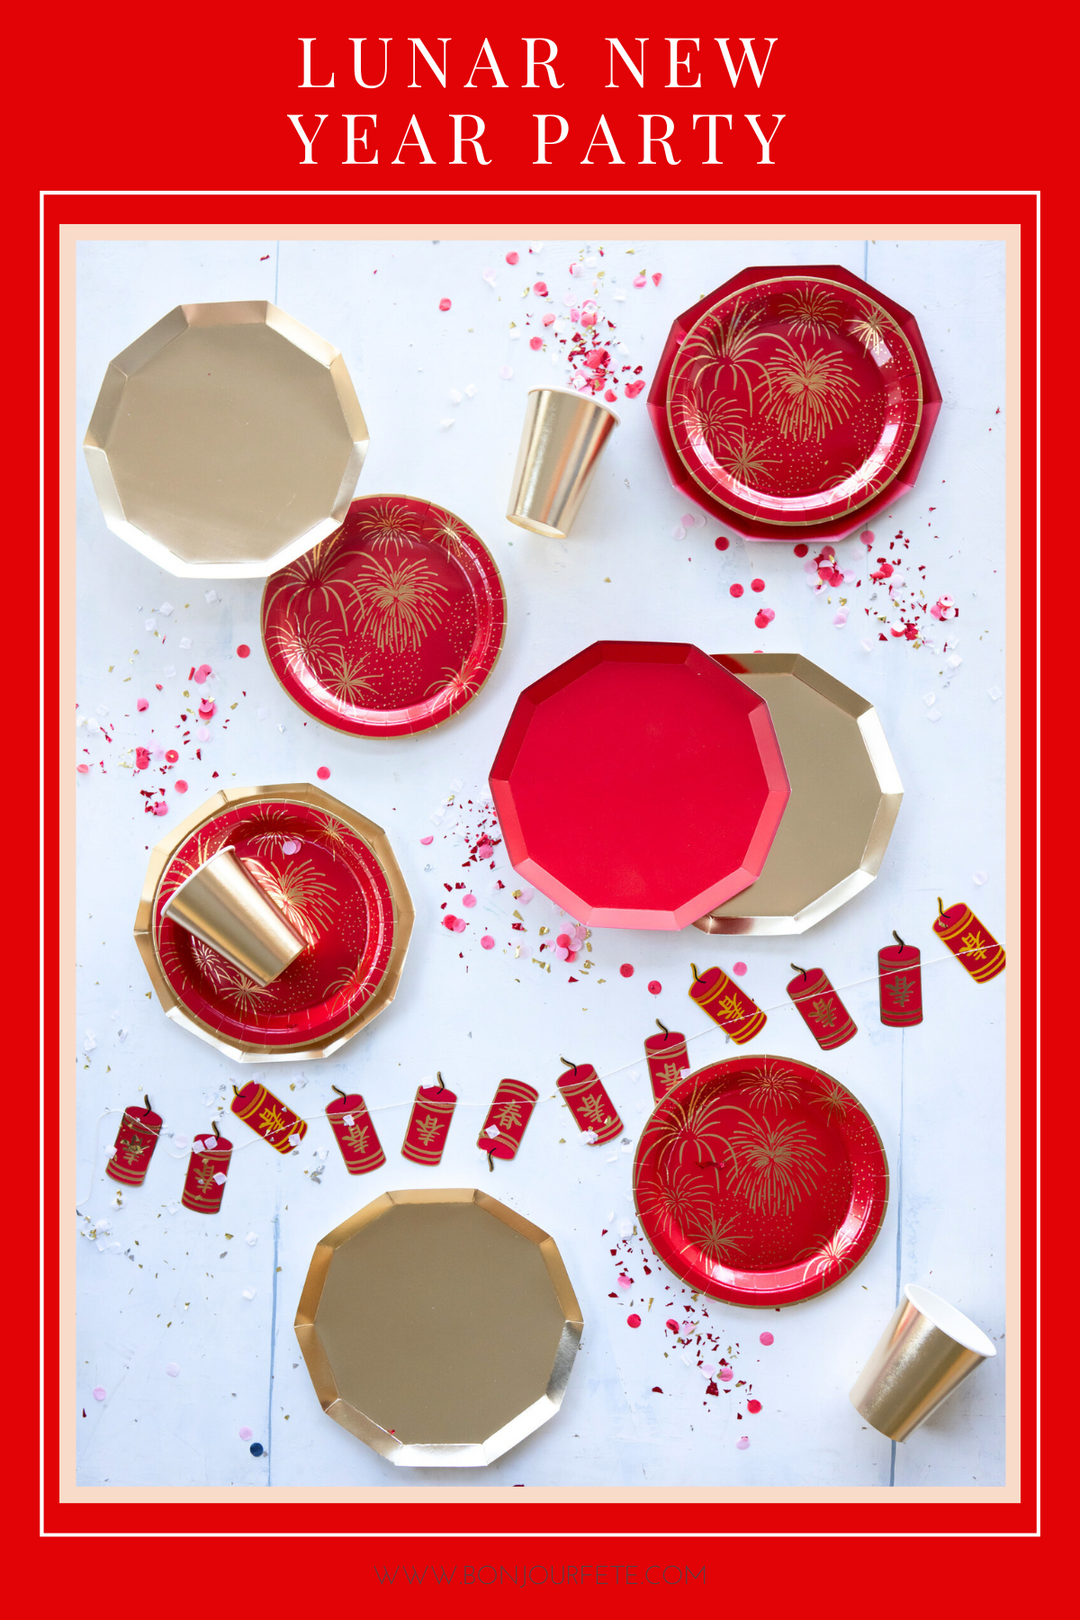 HOW TO THROW A LUNAR NEW YEAR PARTY